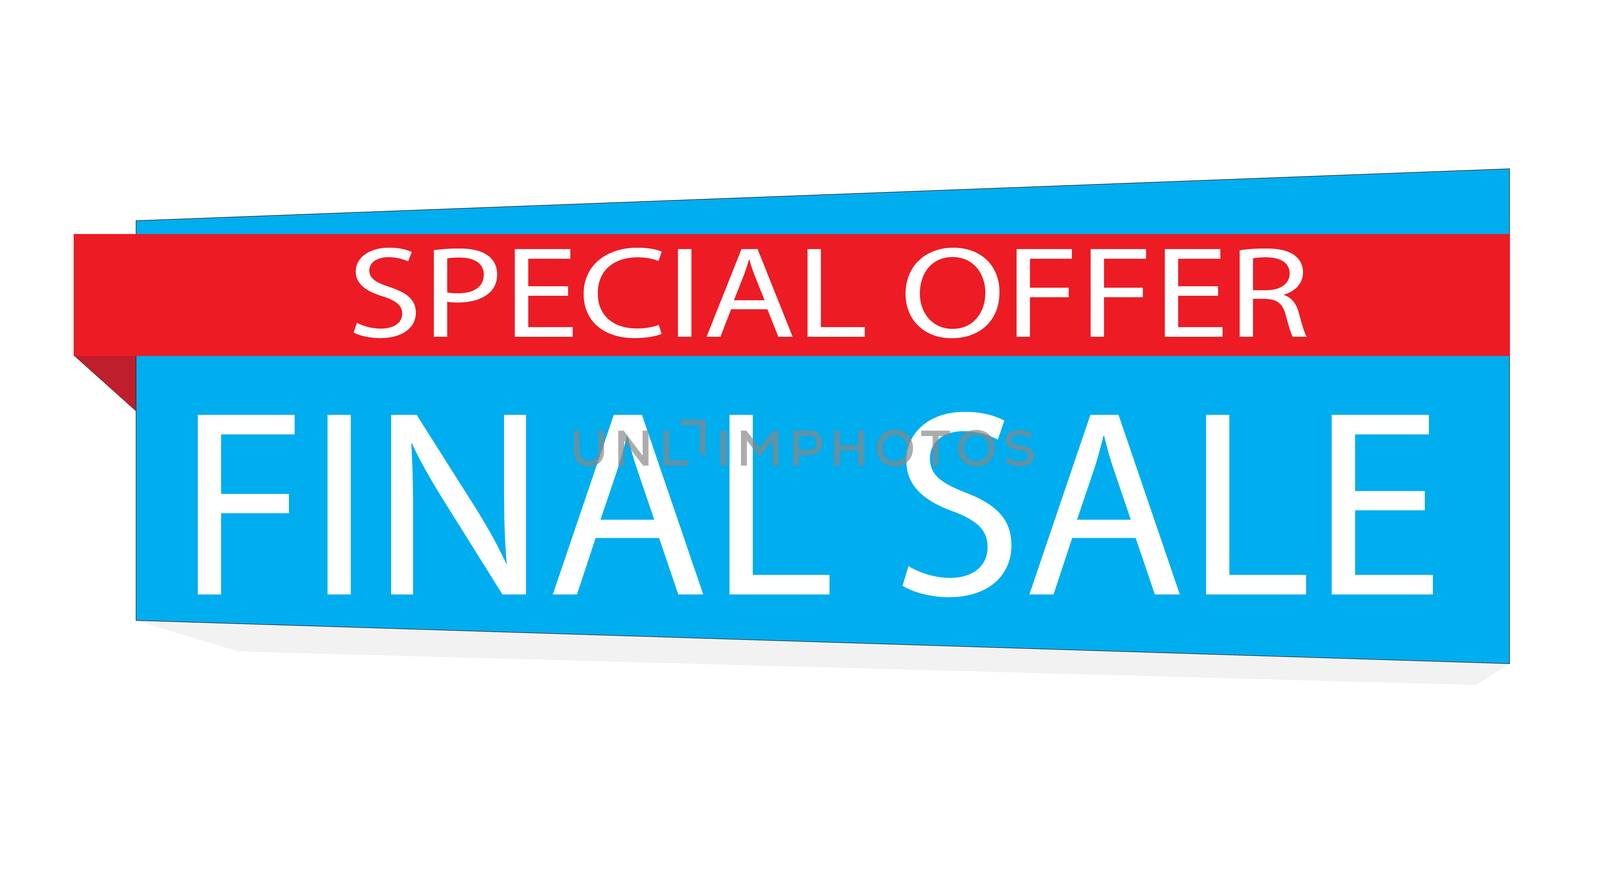 special offer final sale banner on white background. special offer blue label.